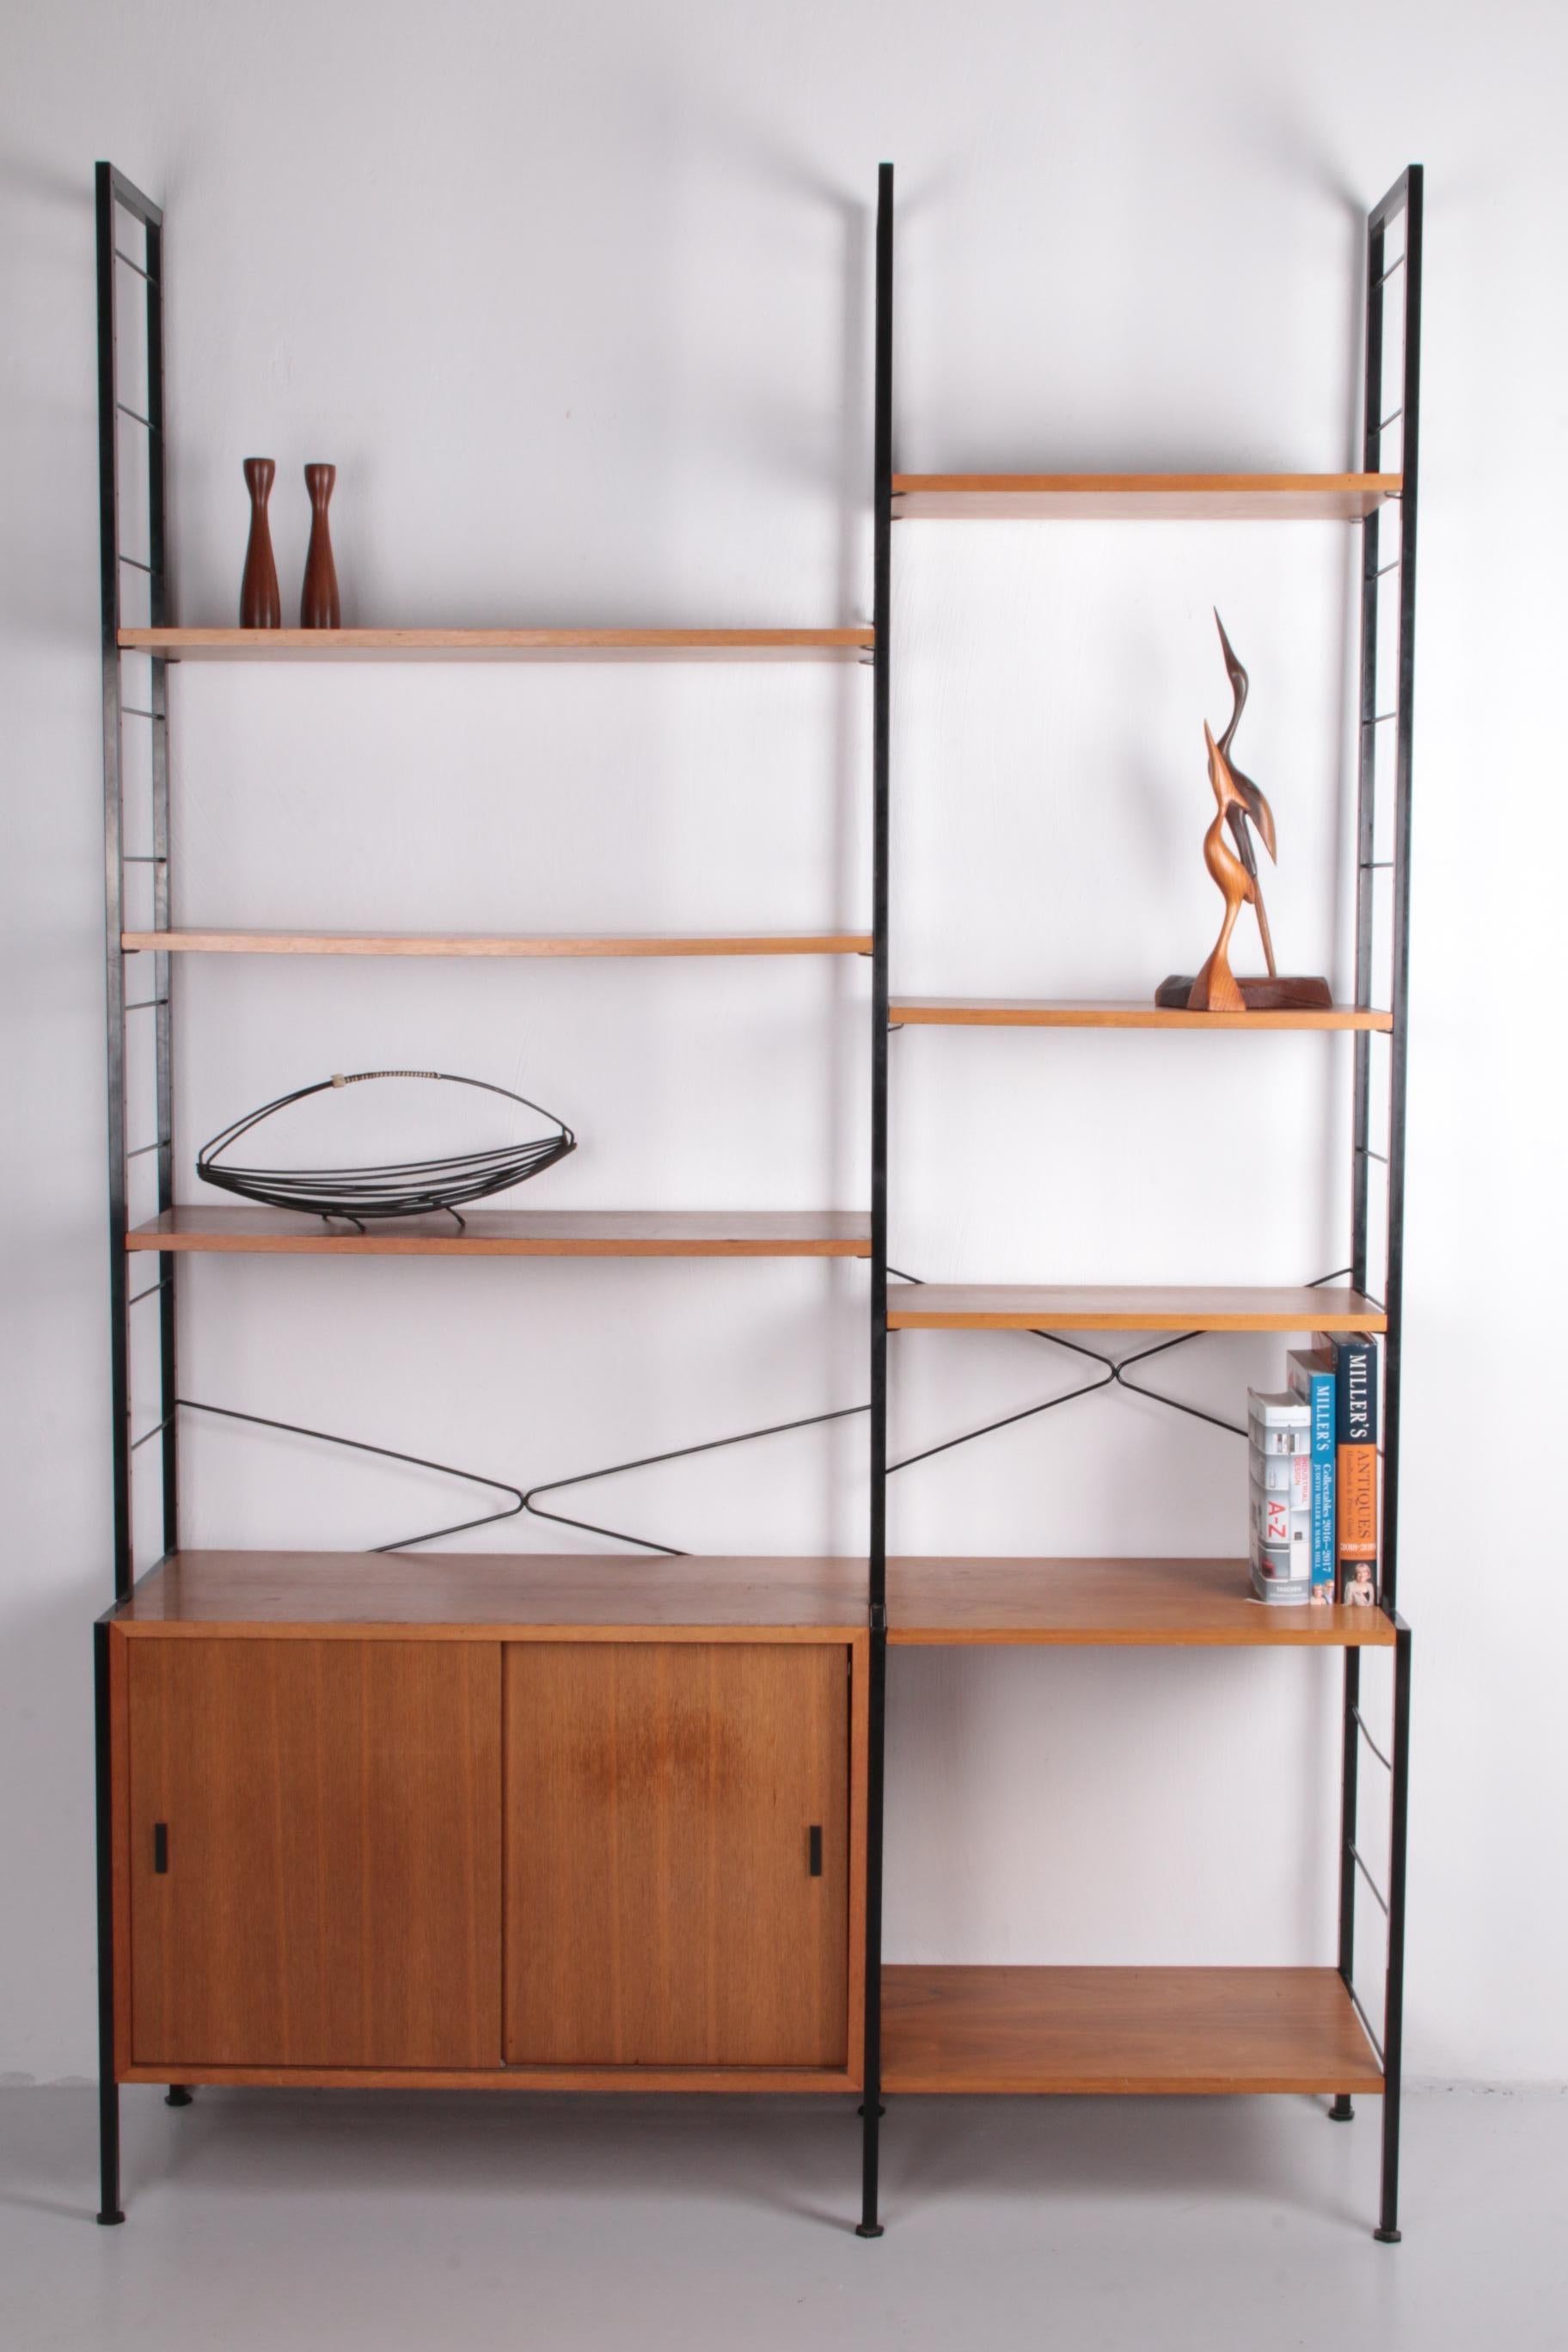 String Regal bookcase made in Germany, 1960s


Wall unit made in Germany in the 1970s.

Made of 1960s veneer wood.

It is still in a very nice vintage condition with normal signs of wear and patina. The bookshelf is characterized by its